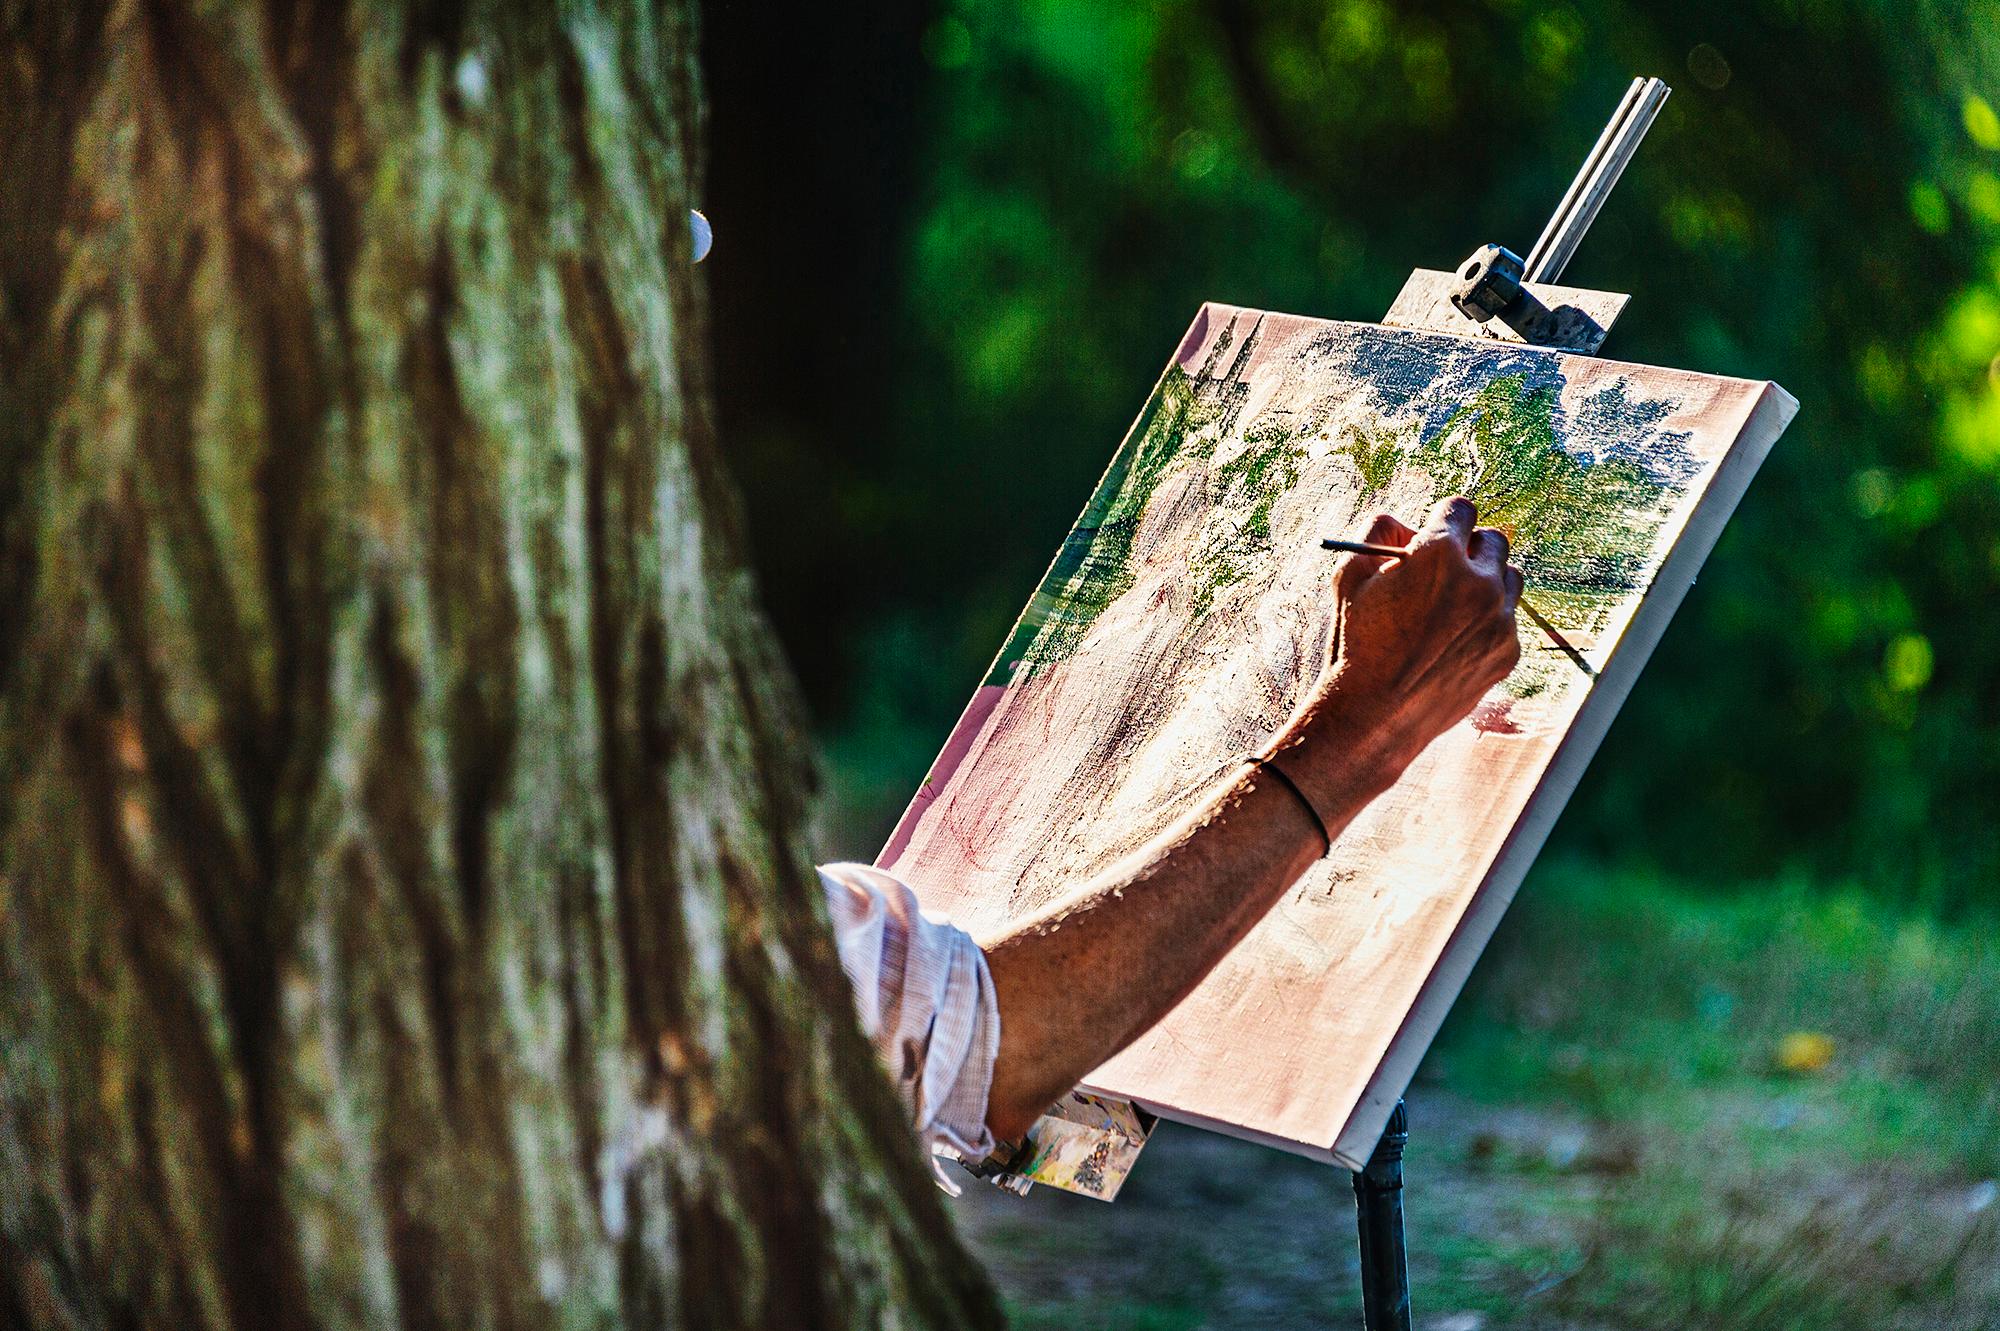 Mitchell Funk Figurative Photograph - Picture of the Unknown - Plein Air Painter's Surreal Dream